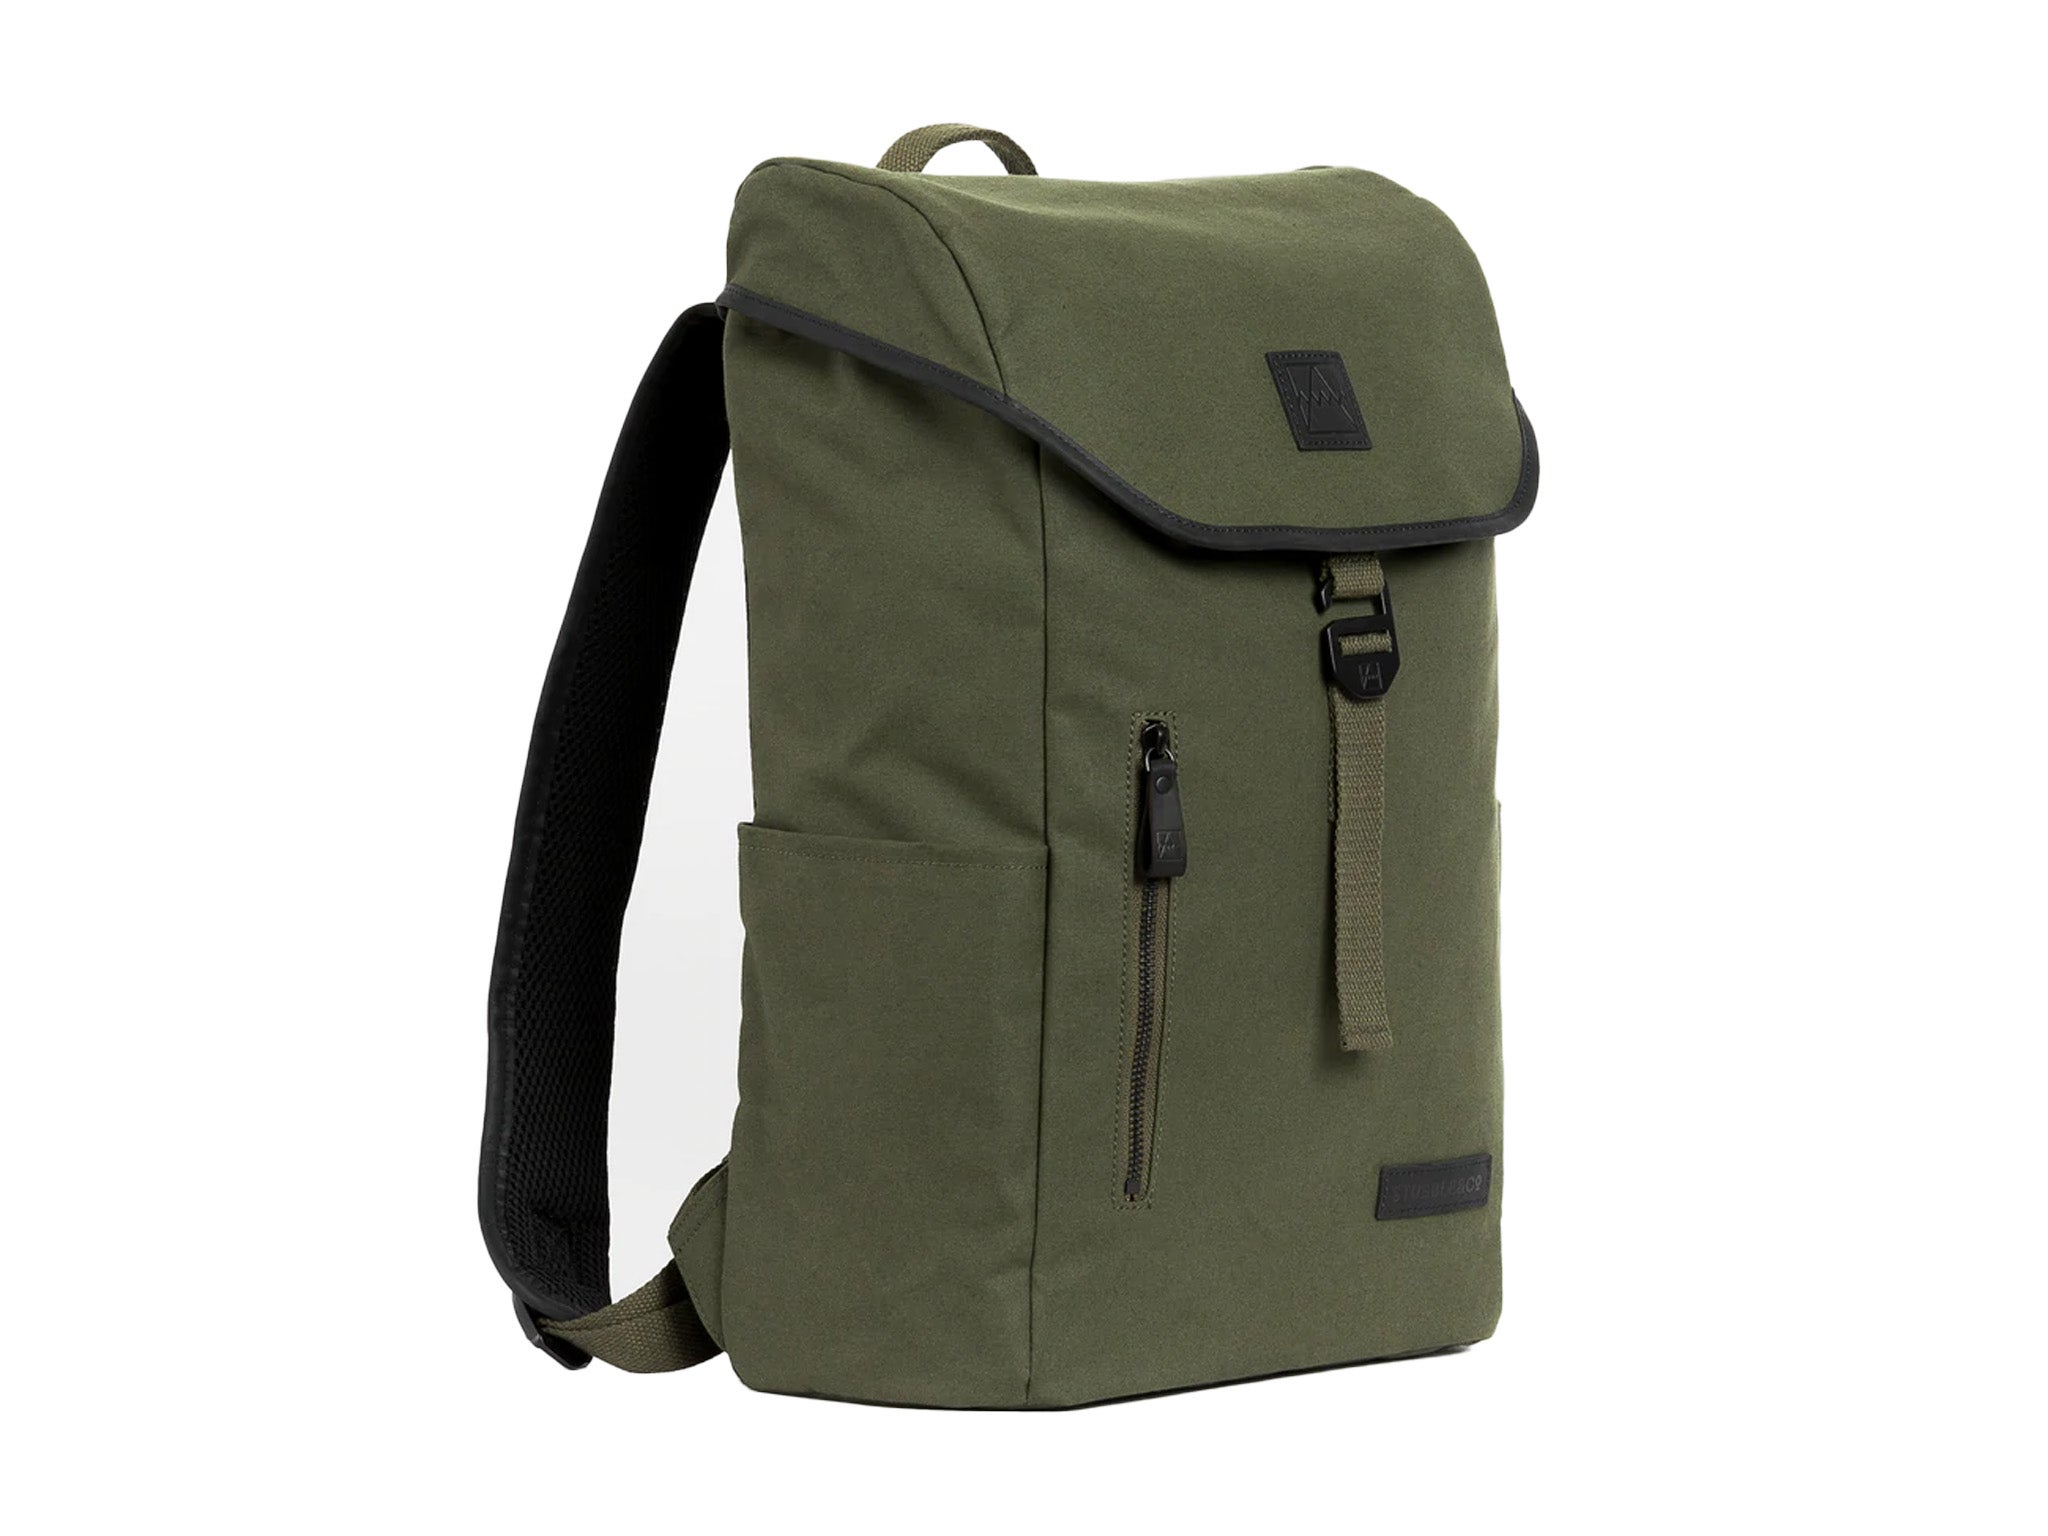 Stubble & Co the backpack  indybest.jpg